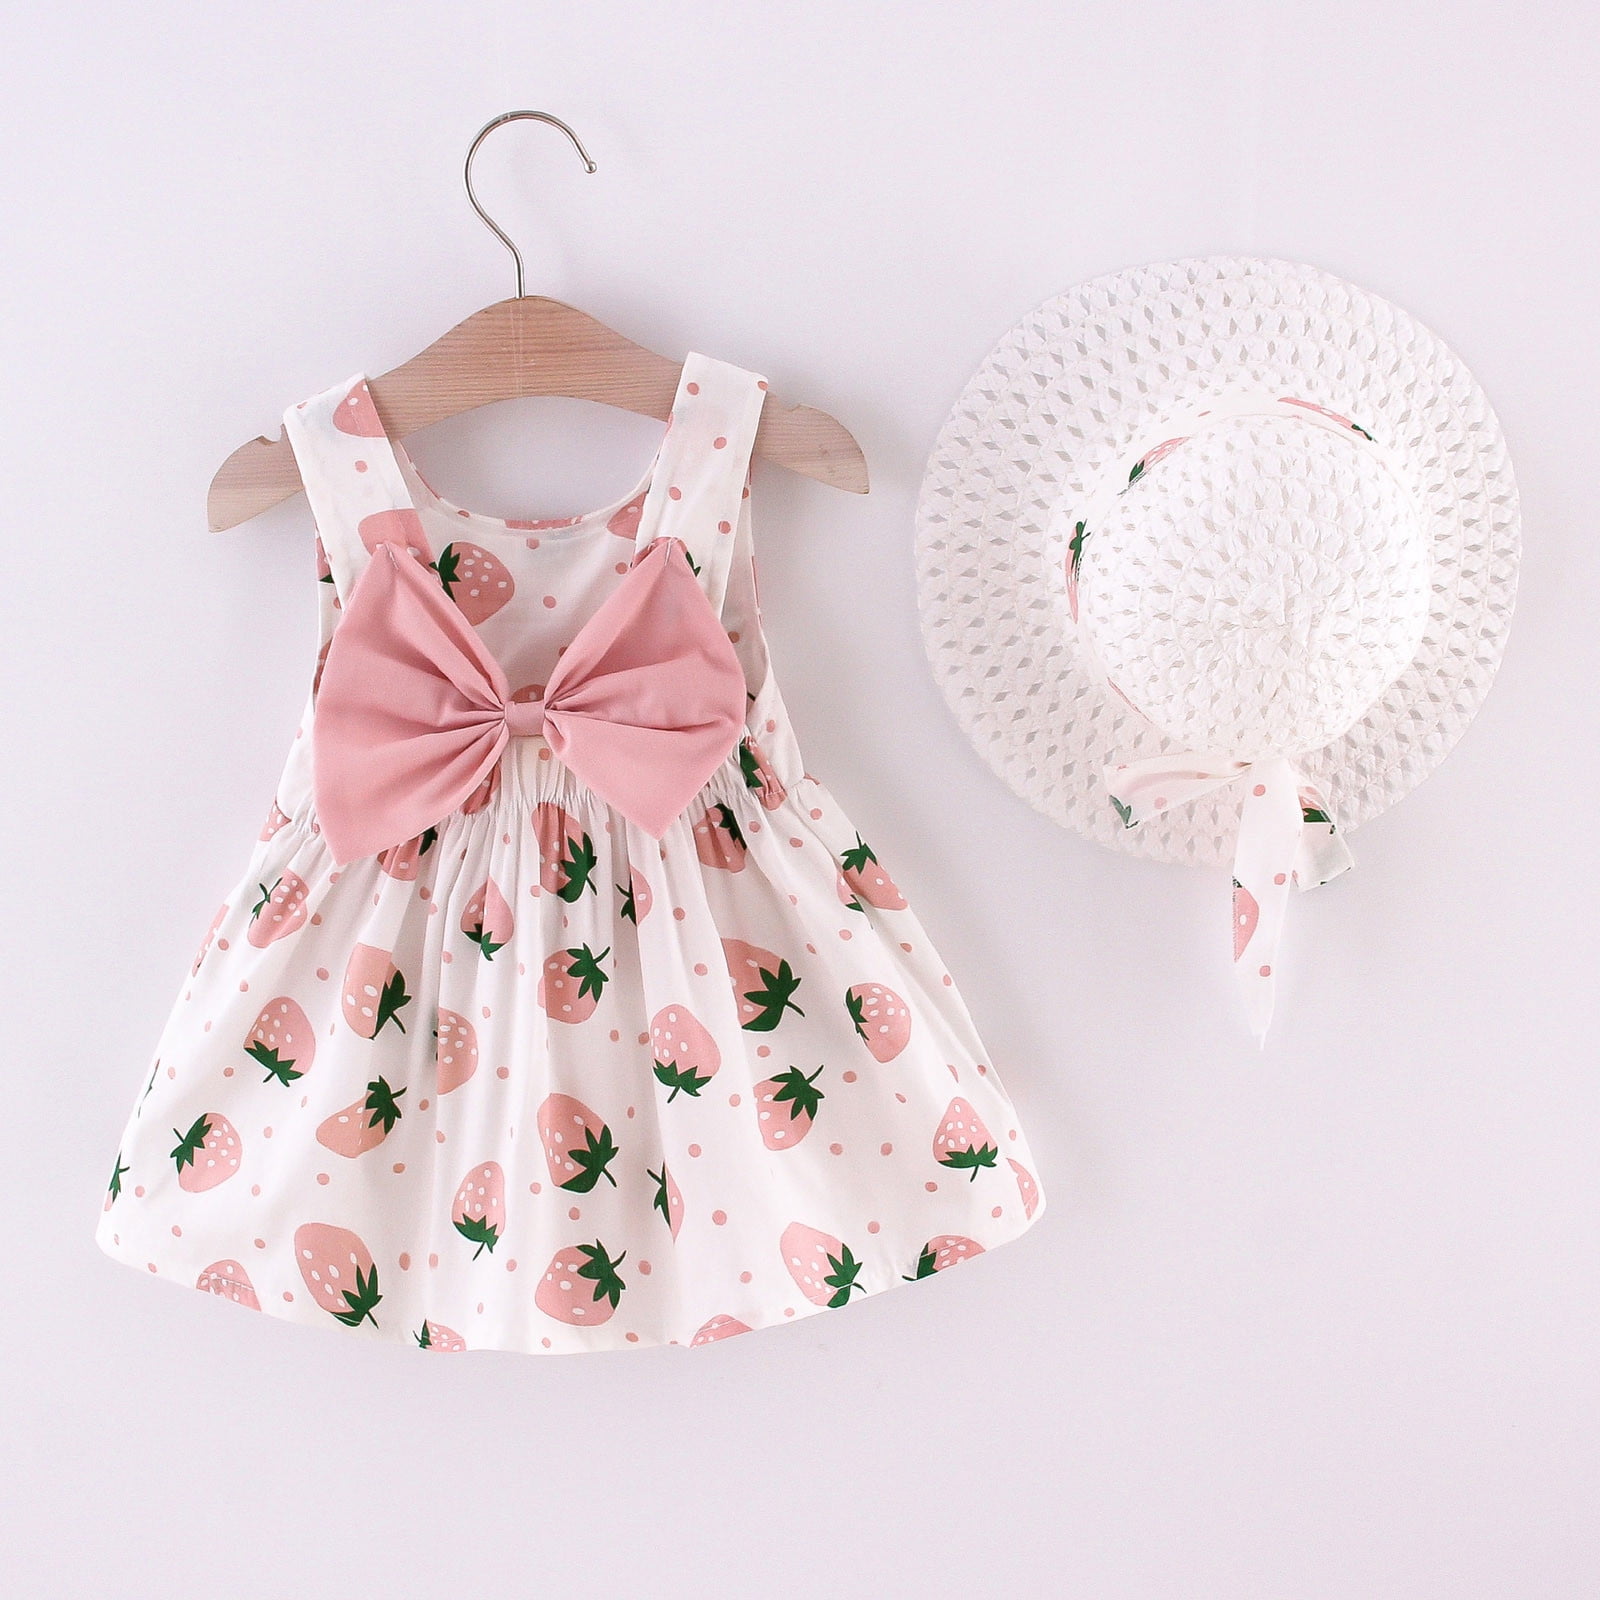 JYC 2019 Baby Girl Dresses Toddler Kid Girl Dot Printed Bow Princess Dress+Hat Outfits Set Clothes 